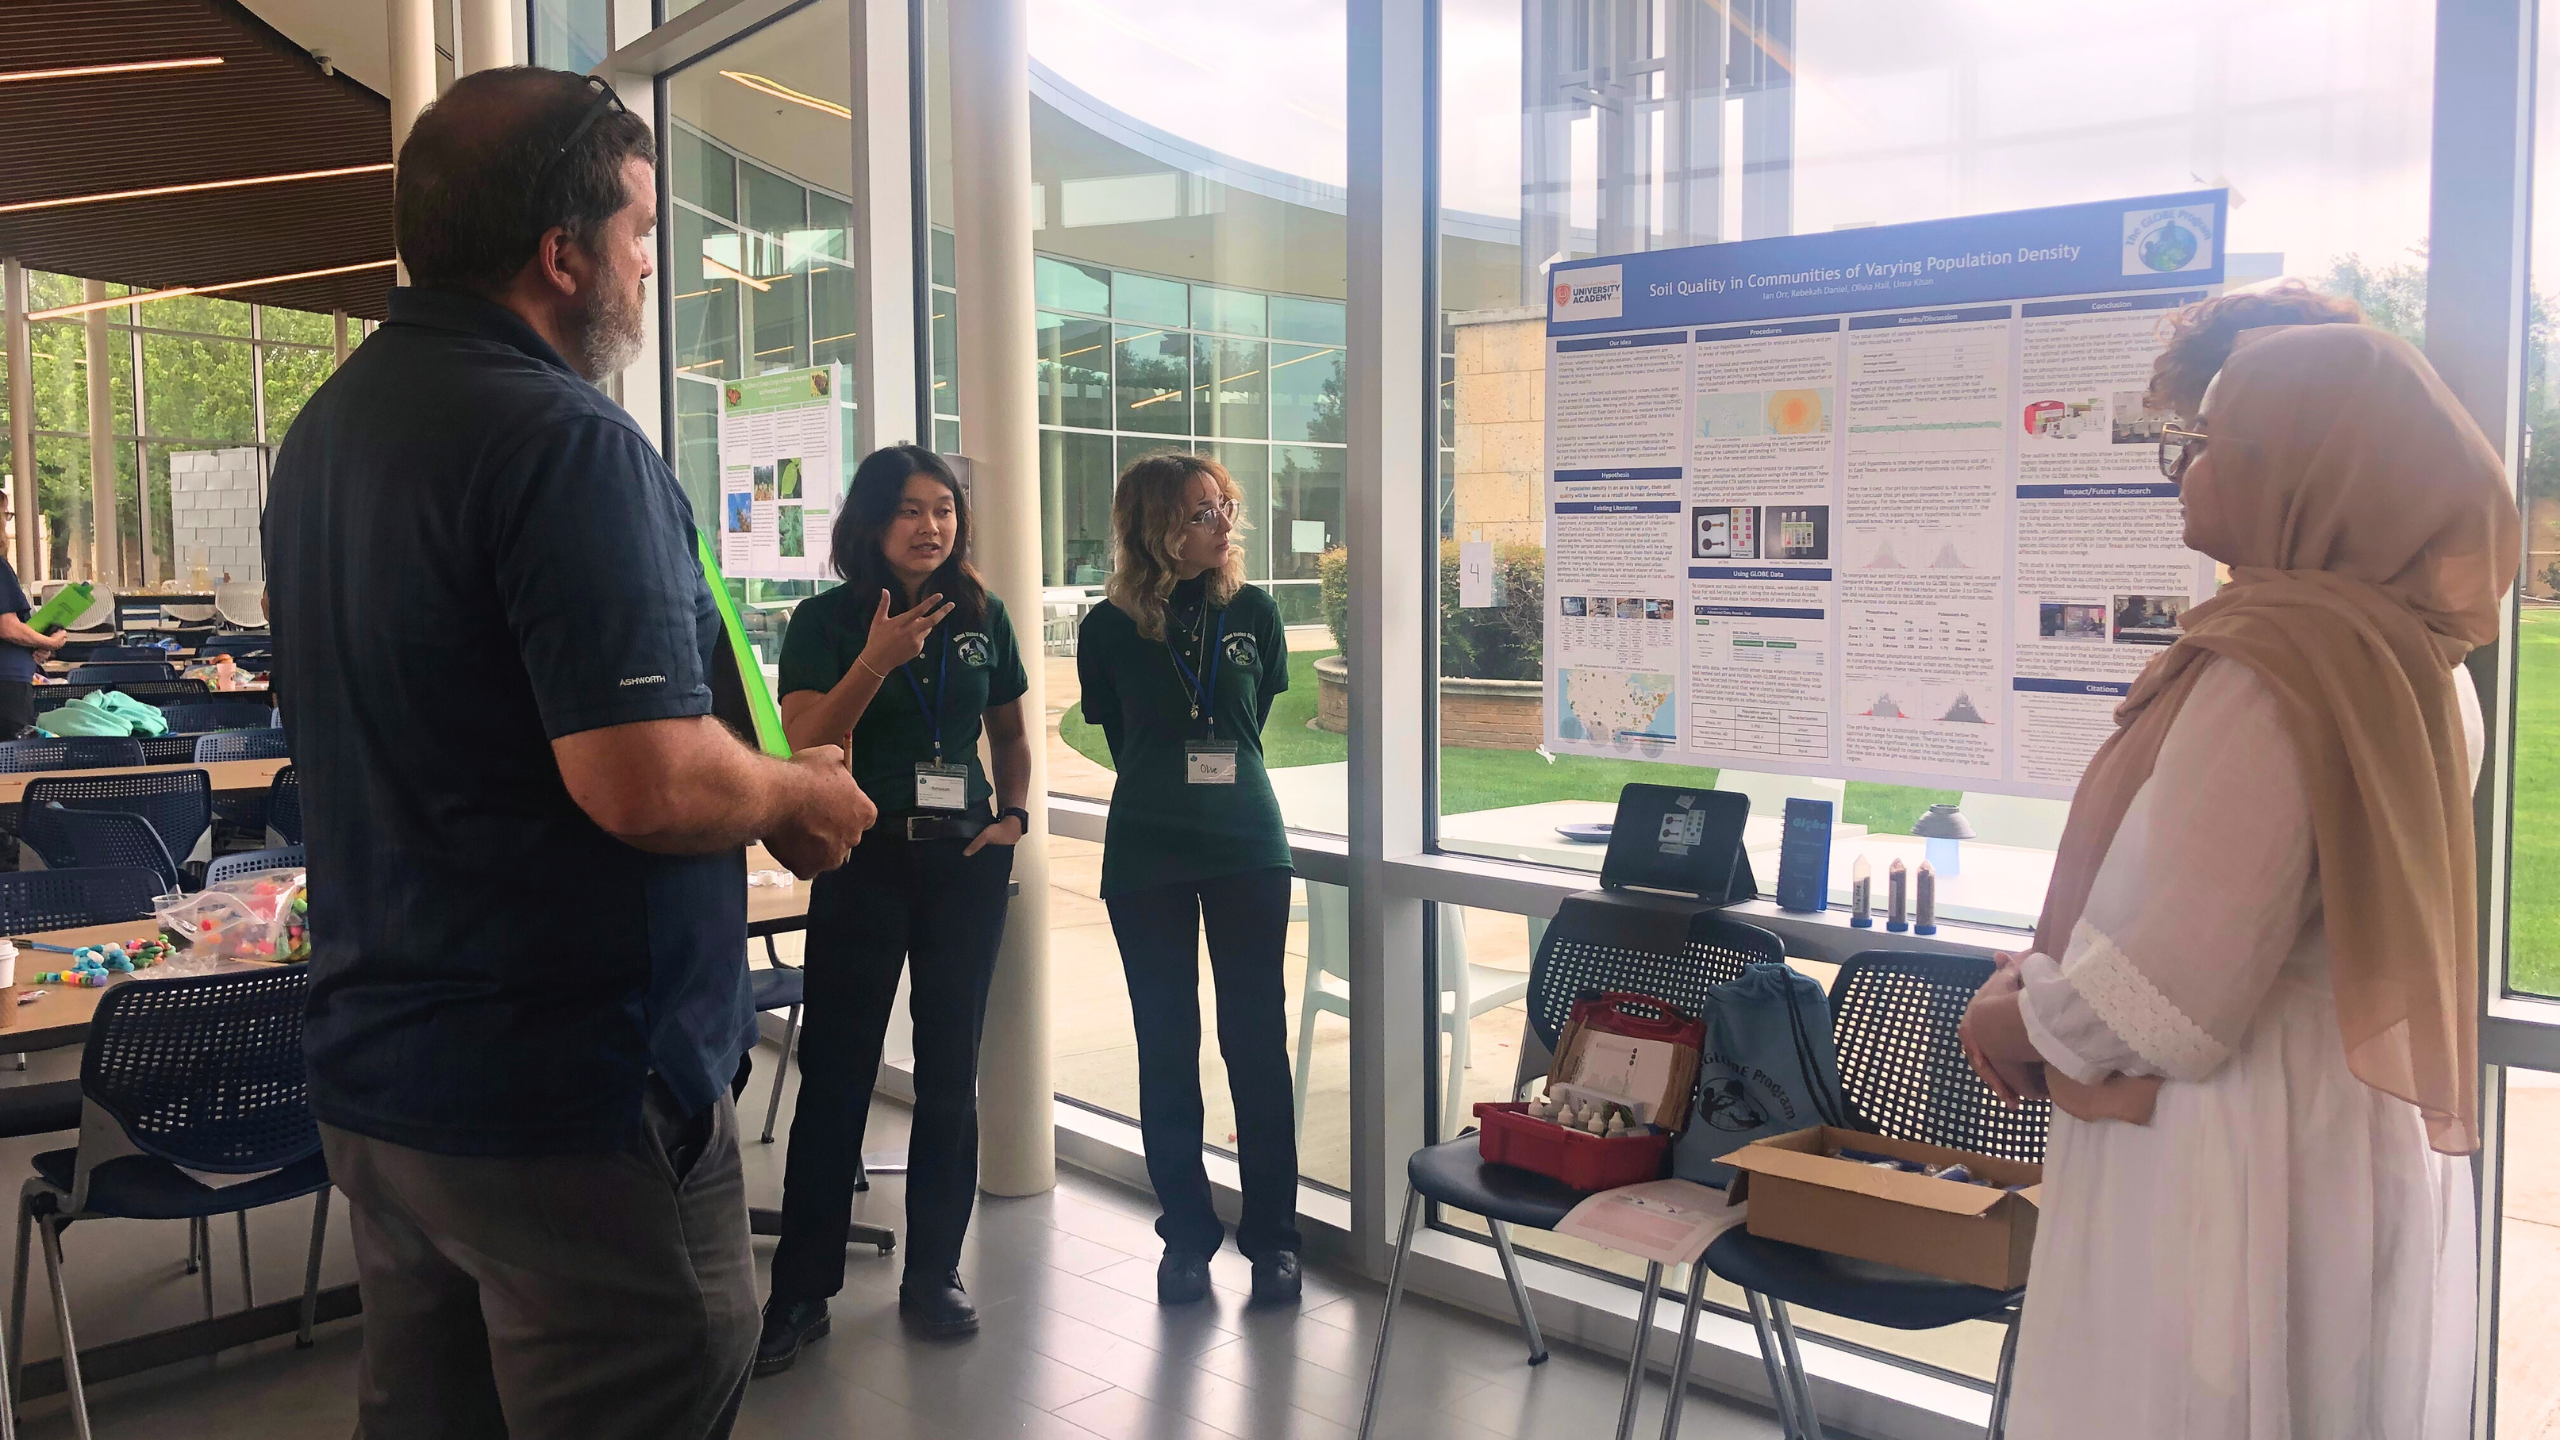 students present their research on Soil Quality in Communities of Varying Population Density to a STEM professional at the Southwest Student Research Symposium